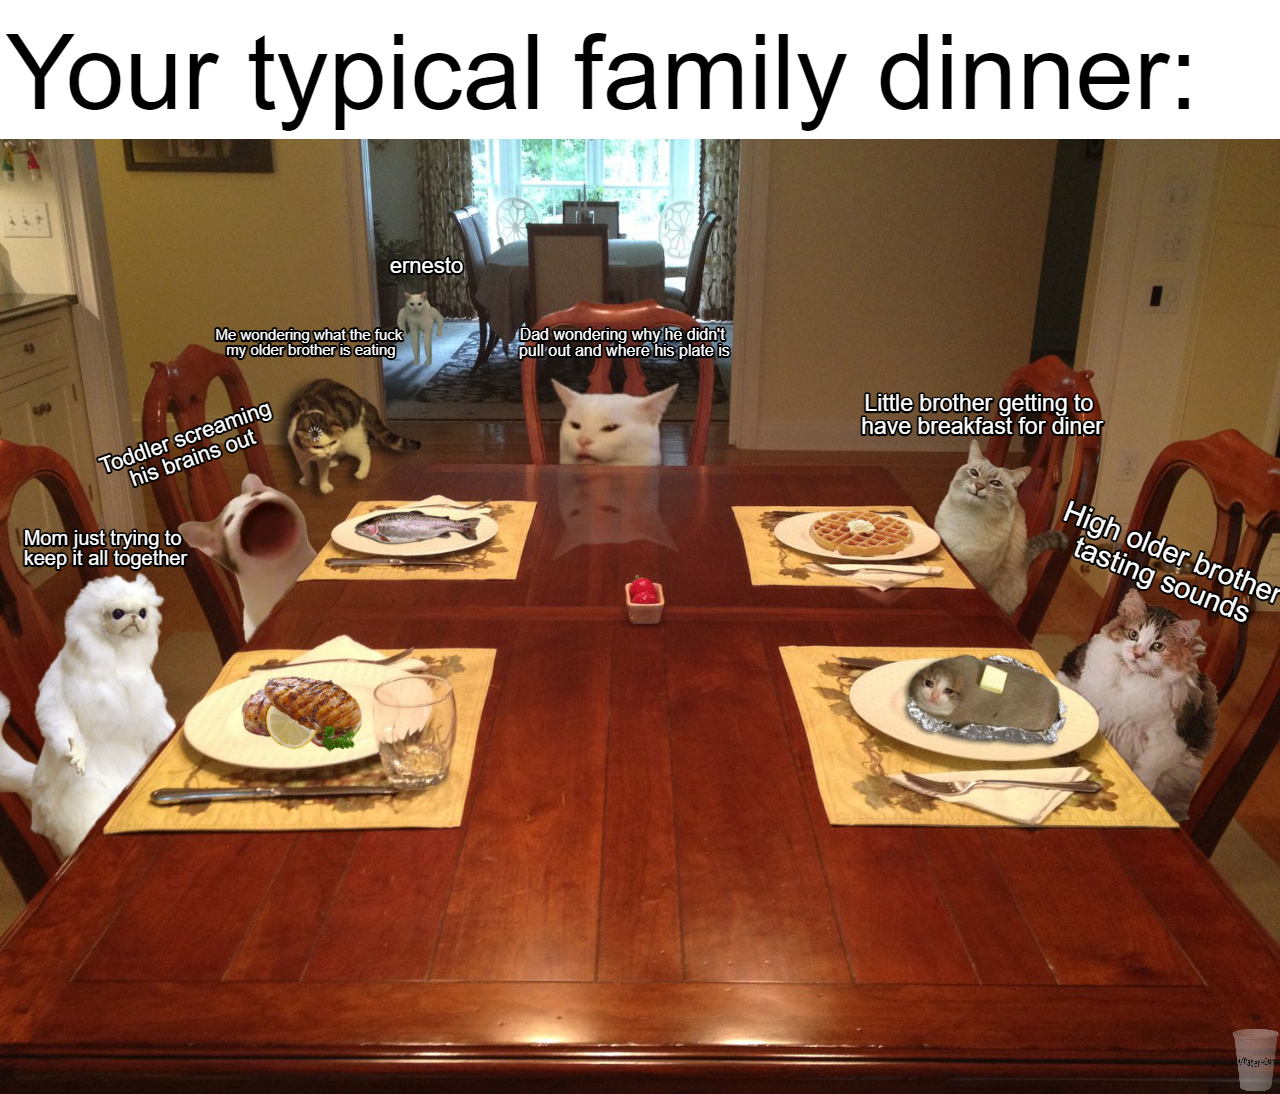 fresh memes - dinner table - Your typical family dinner ernesto Me wwwlar back my older brother Beating ad wondering w dni